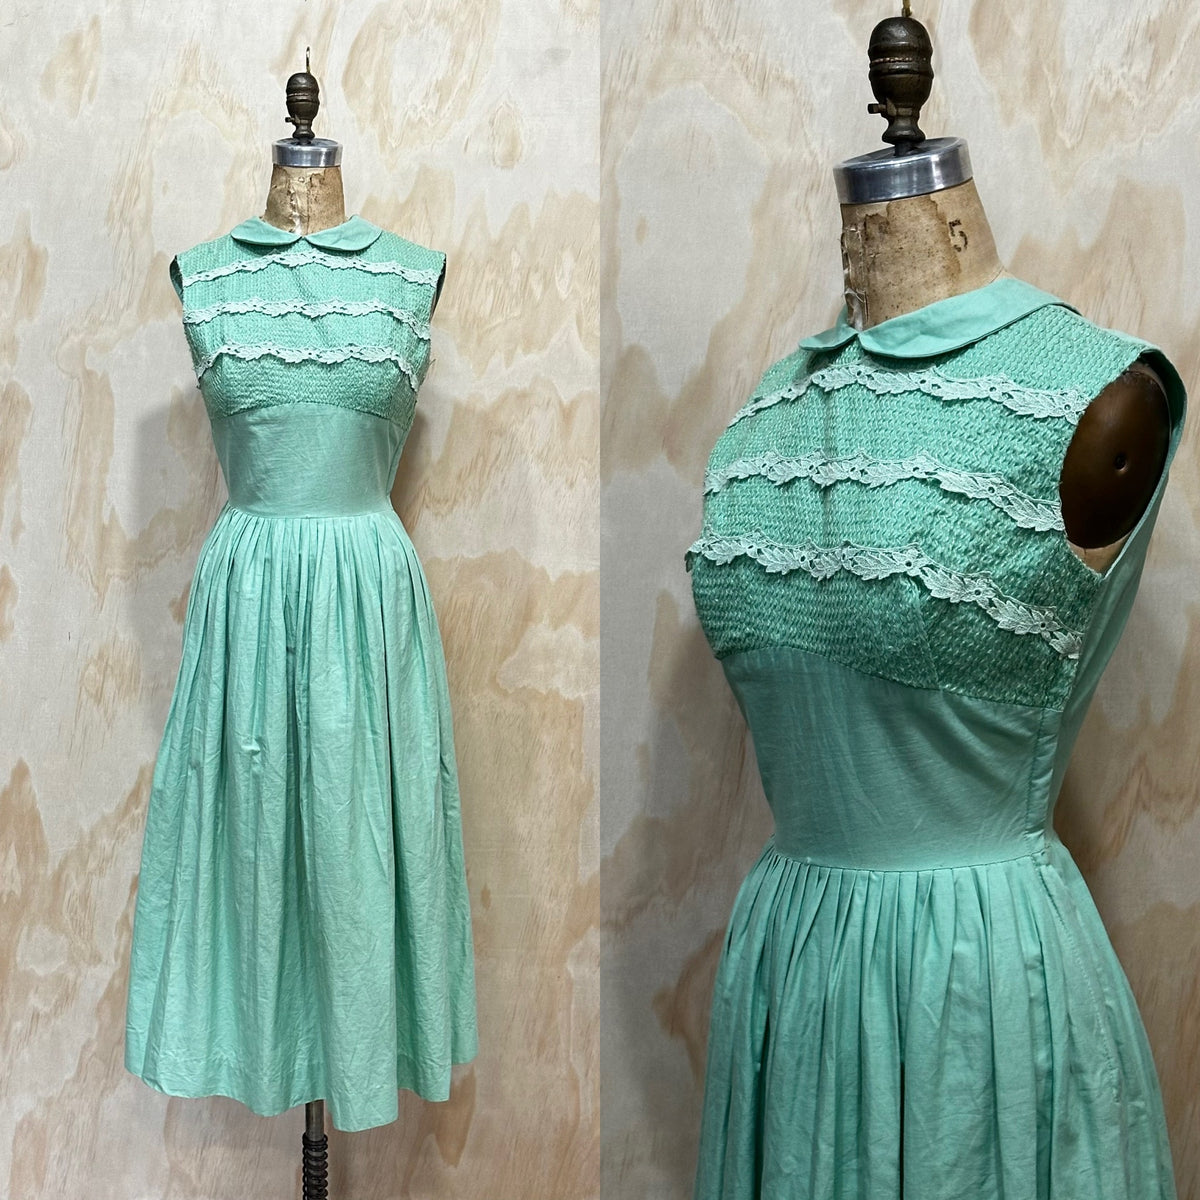 Vintage 1950's Mint Green Dress Party Dress 50s Fit and Flare